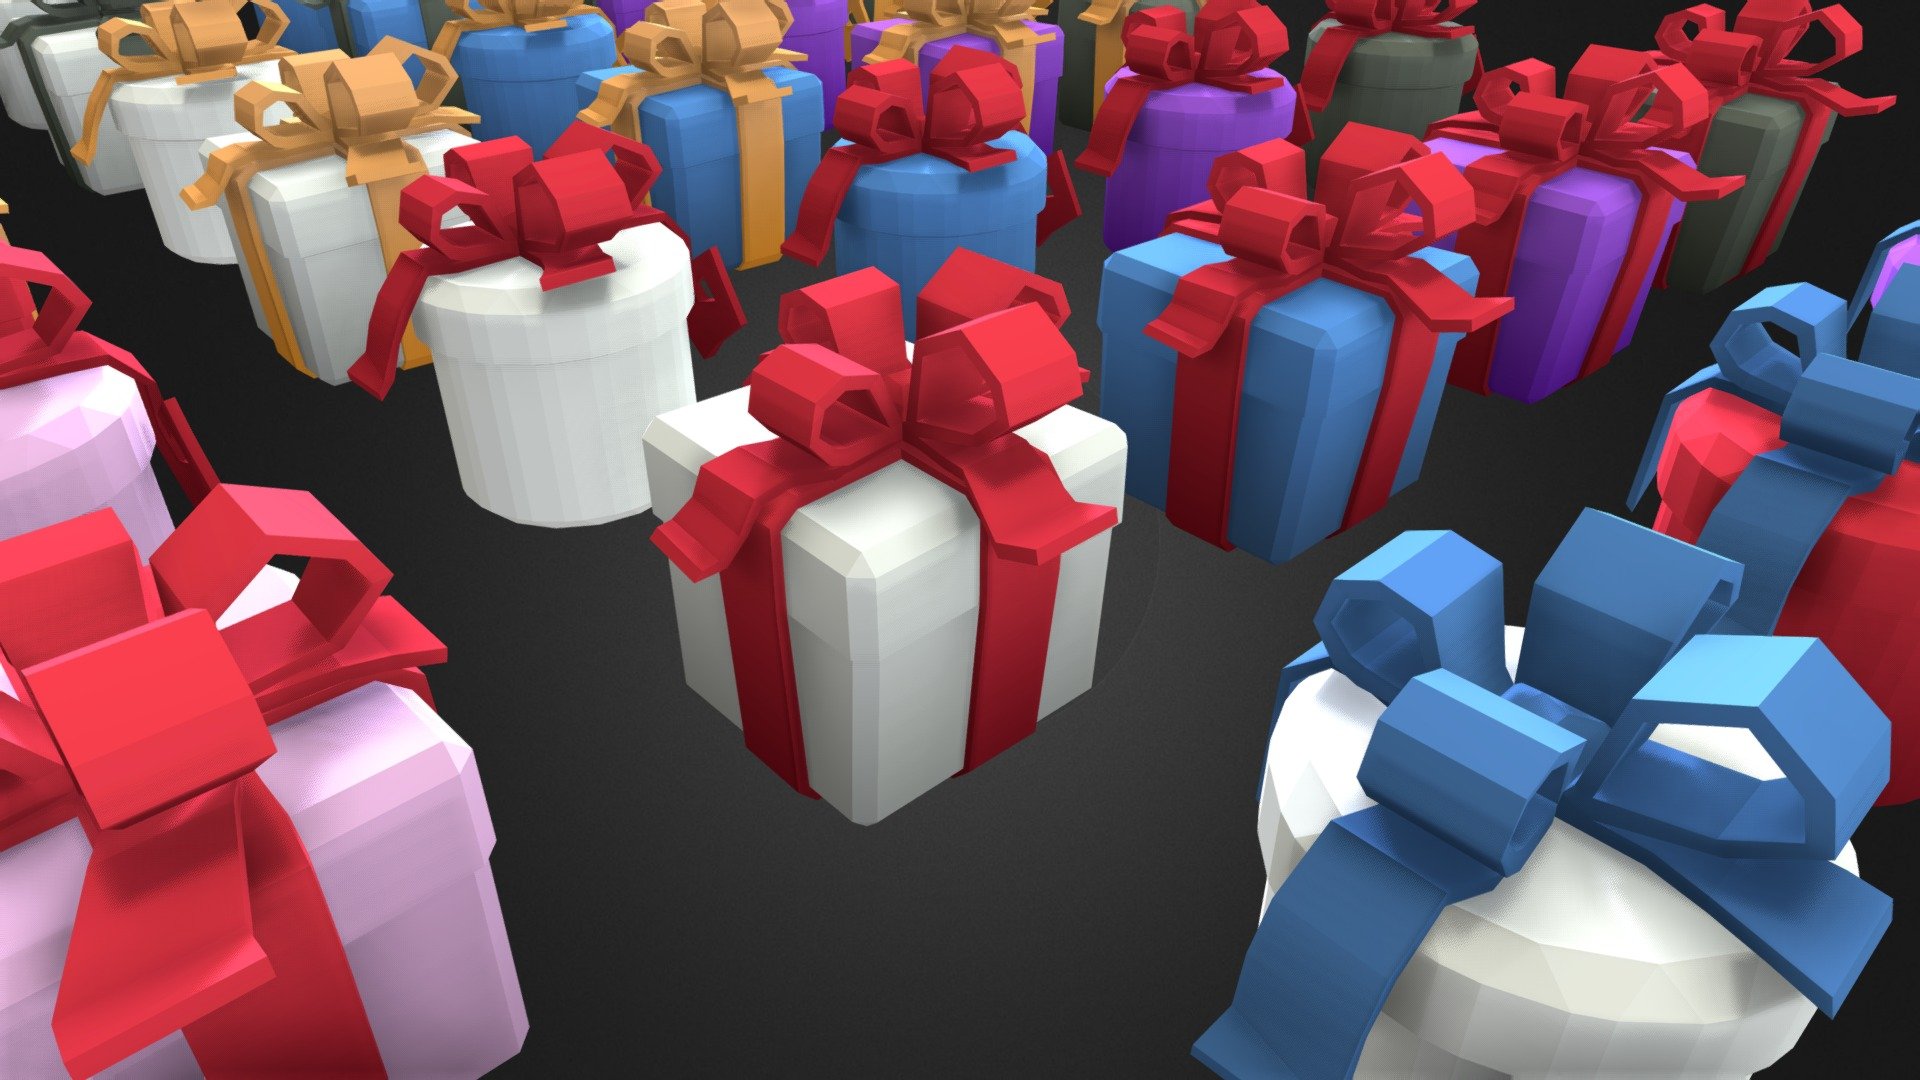 3D model Low poly - Cute Gift Box VR / AR / low-poly